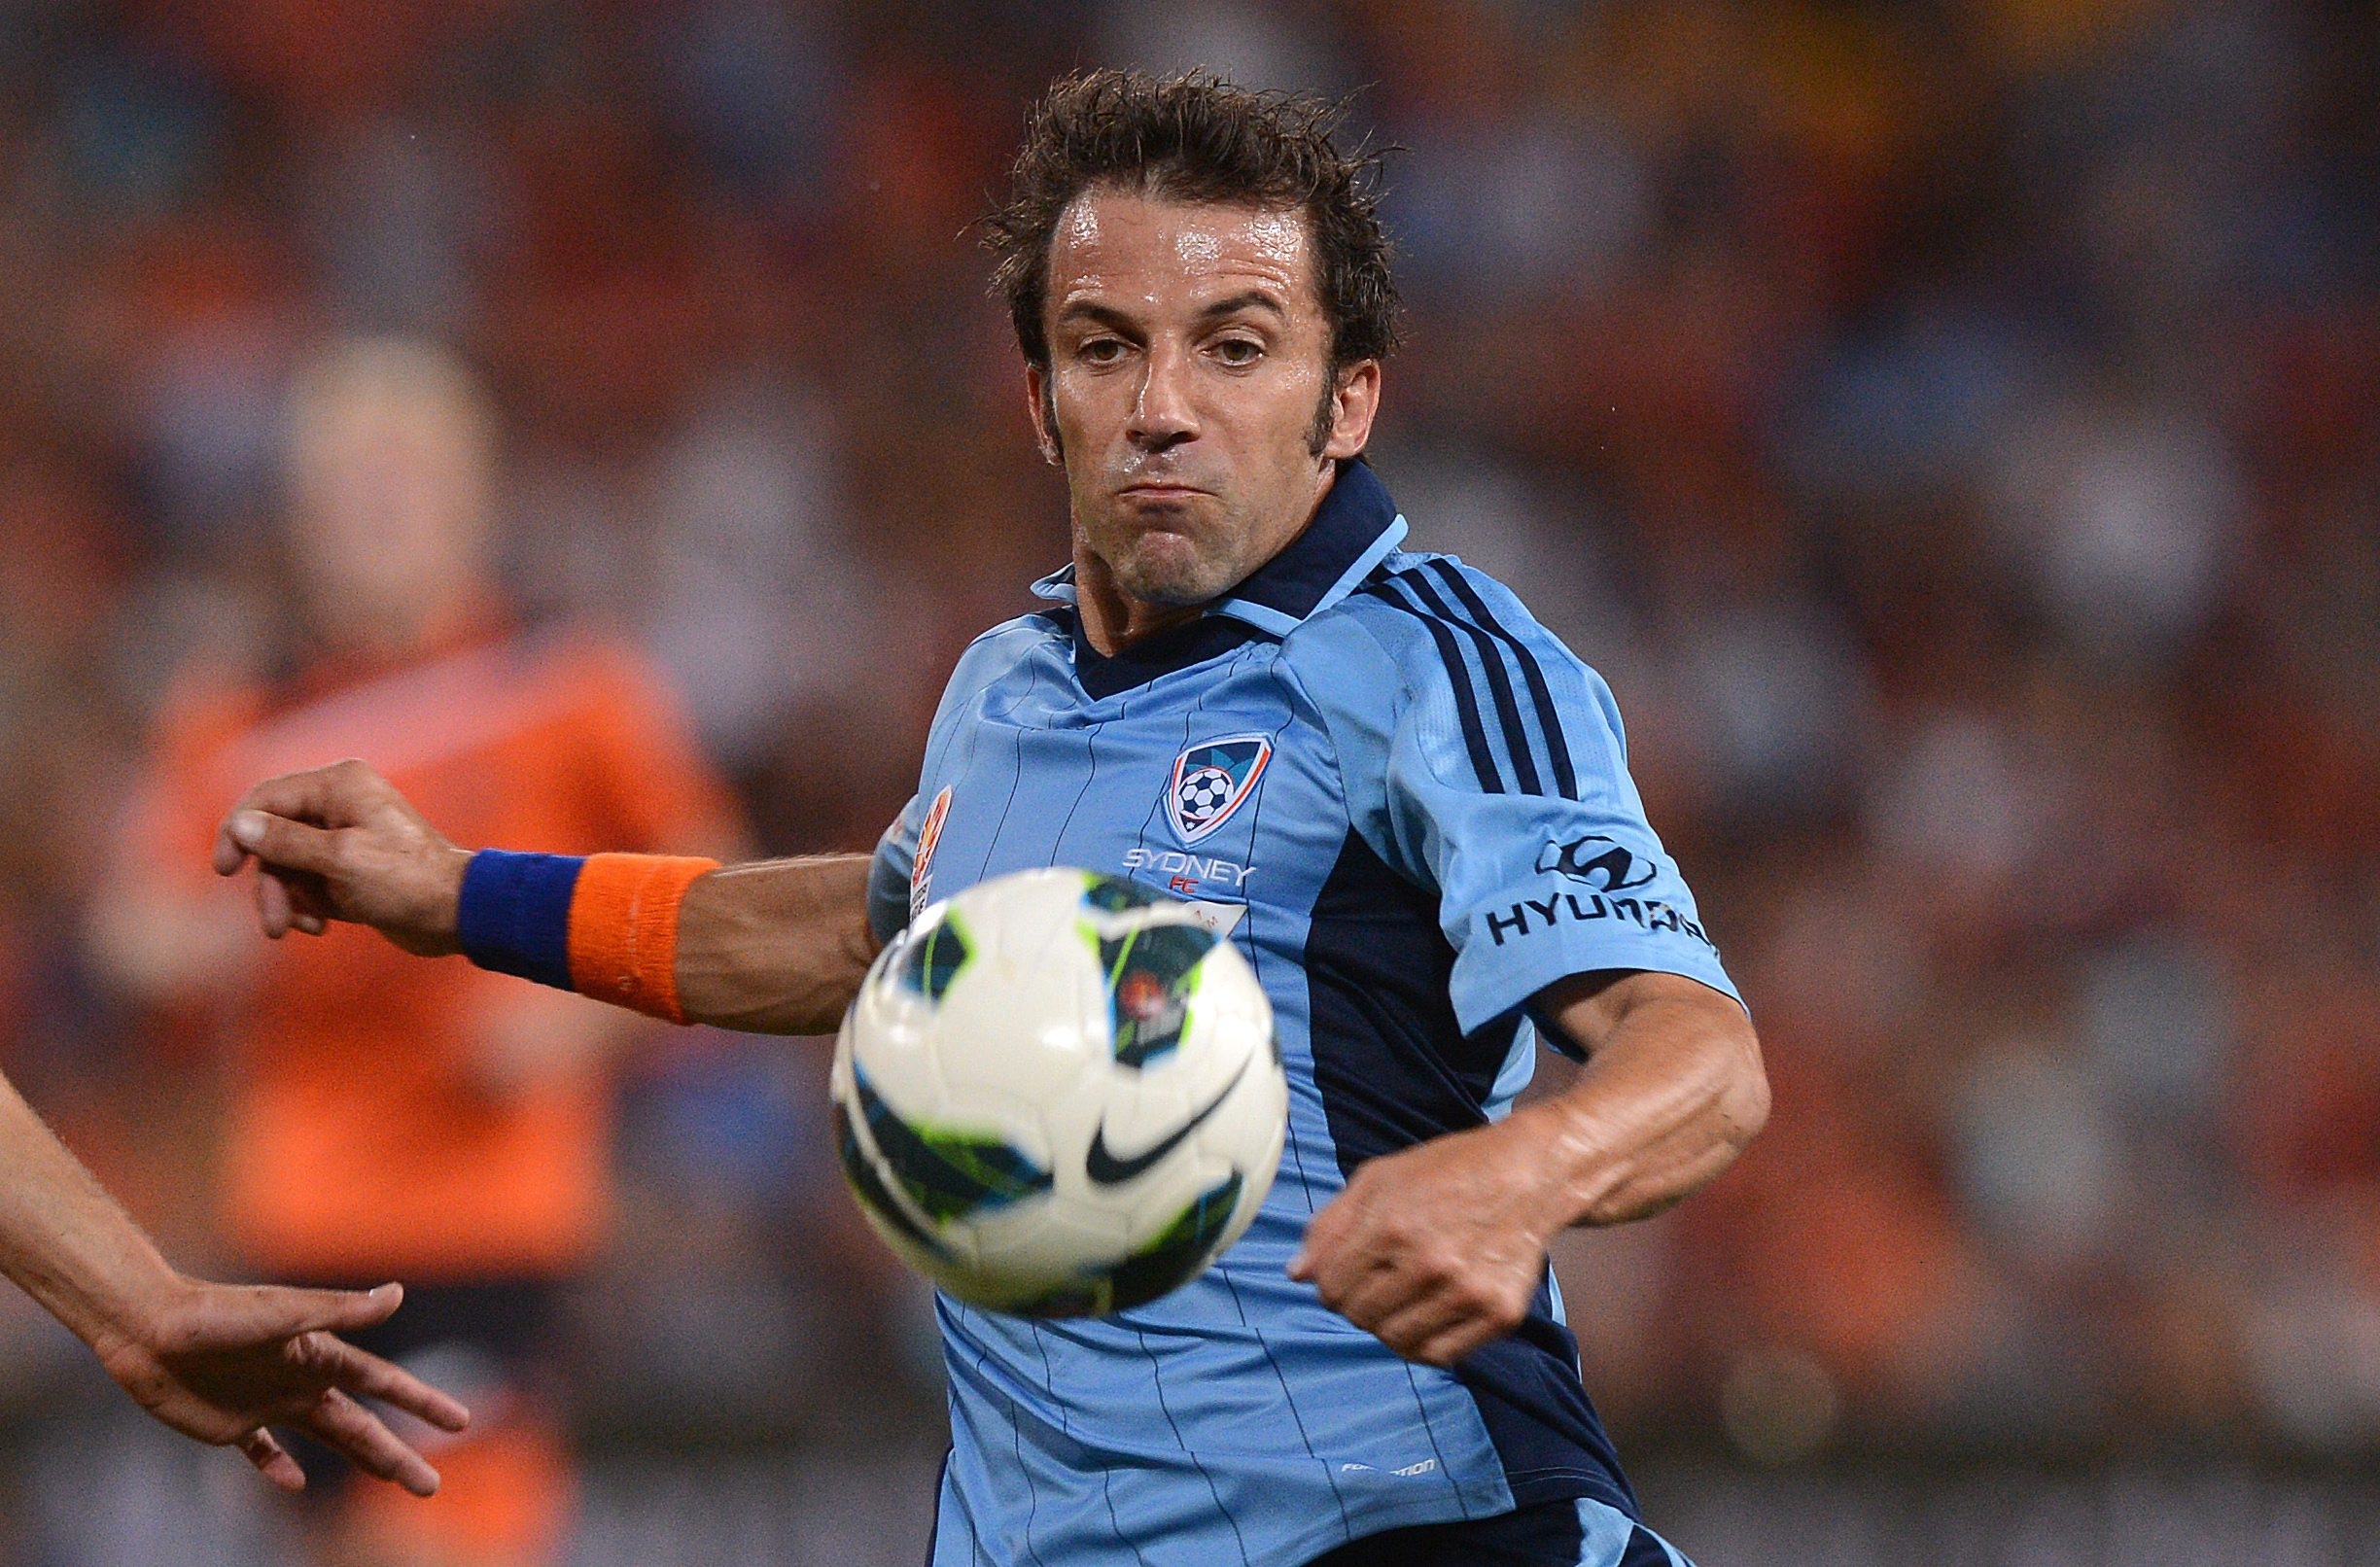 Sydney player Alessandro del Piero in action during a match between the Brisbane Roar and Sydney FC in Brisbane. Photo: EPA